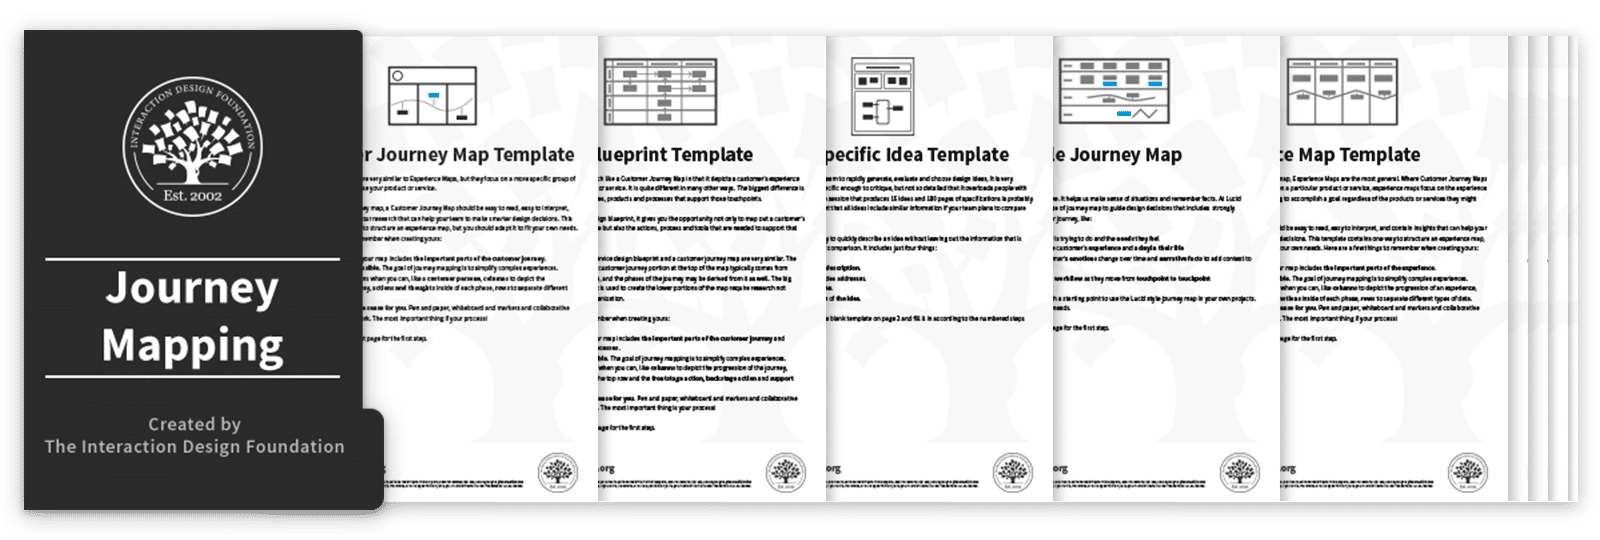 Bundle of 7 Journey Mapping templates